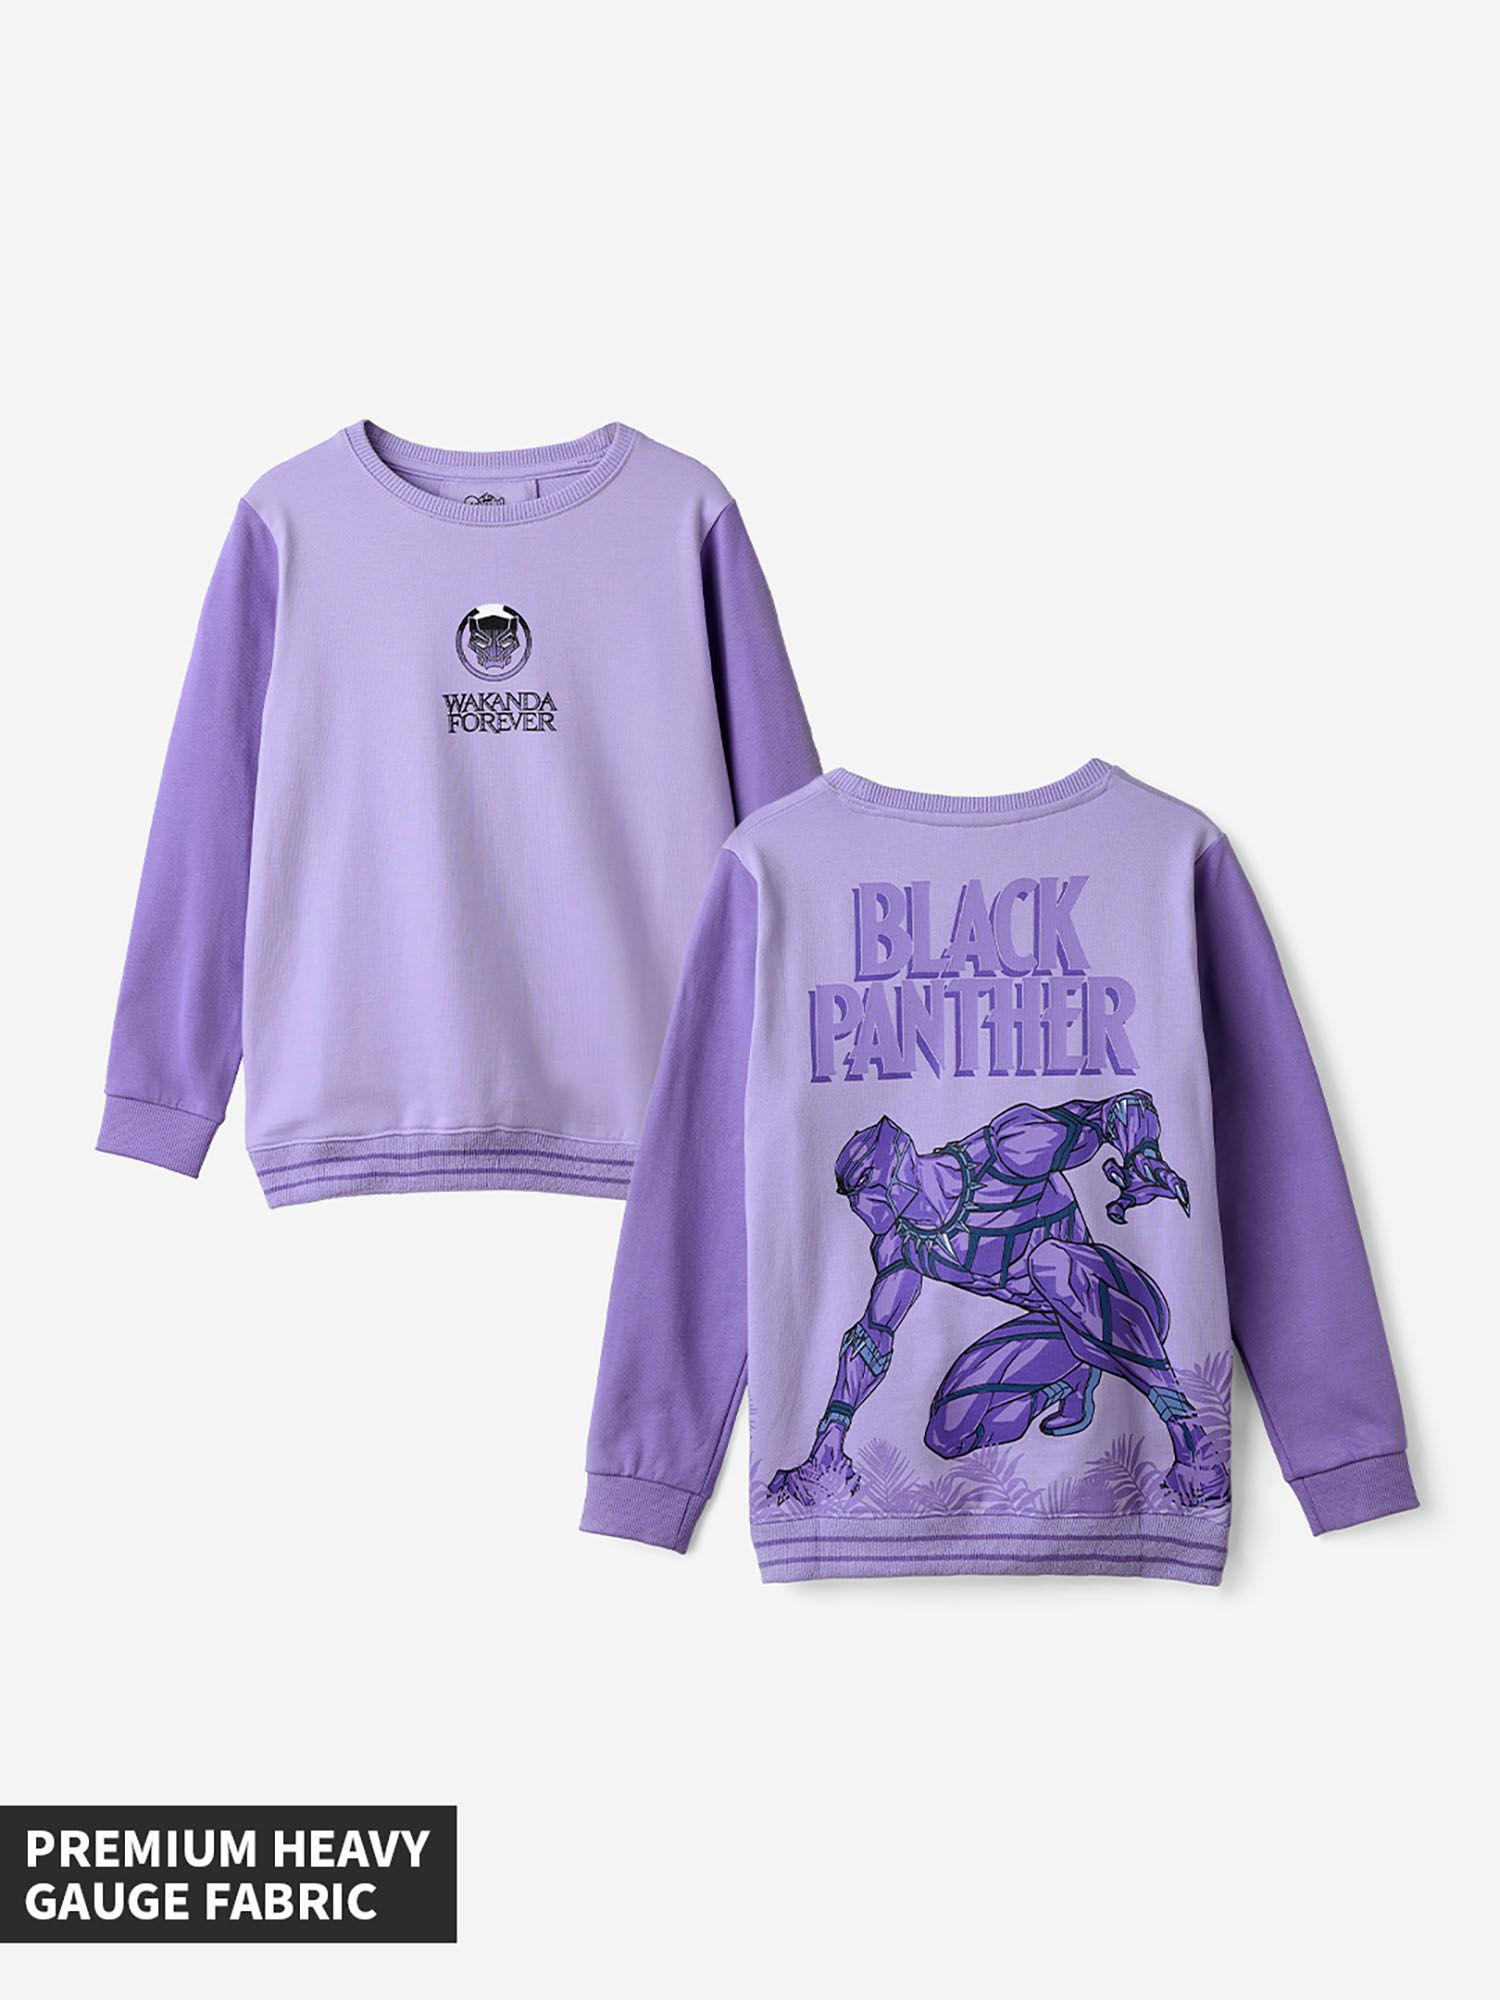 official black panther: the warrior boys sweatshirts